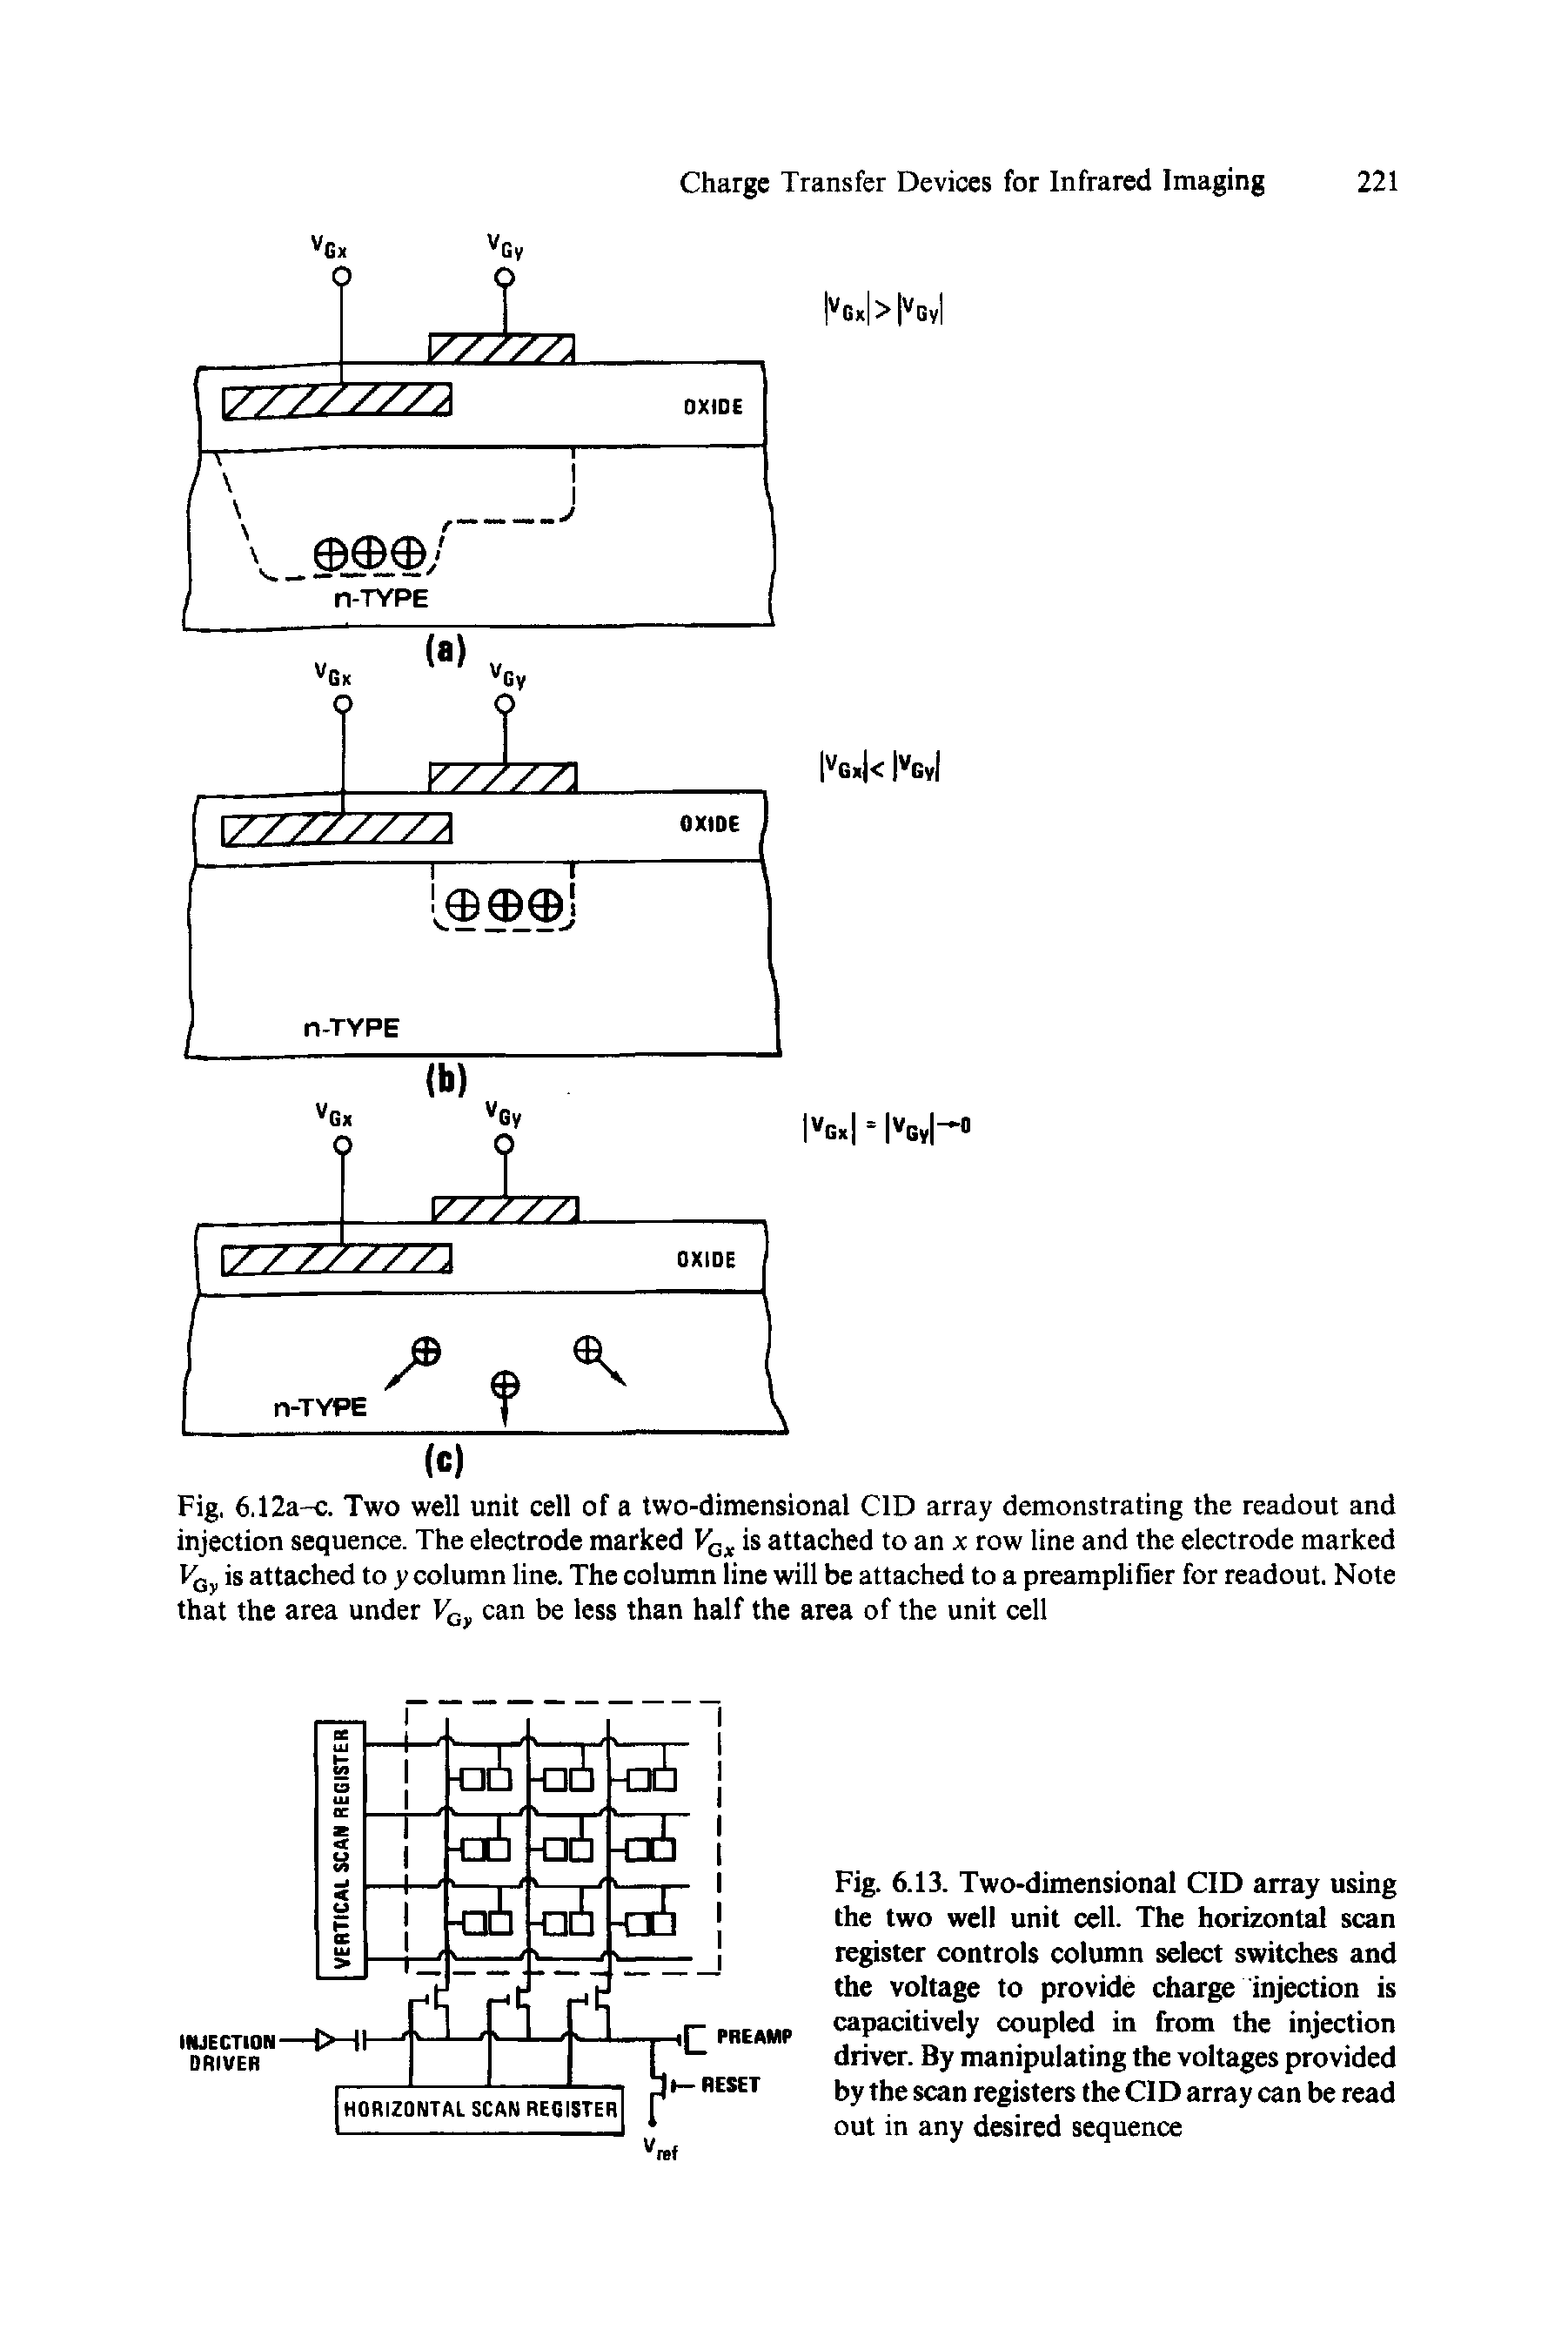 Fig. 6.13. Two-dimensional CID array using the two well unit cell. The horizontal scan register controls column select switches and the voltage to provide charge injection is capacitively coupled in from the injection driver. By manipulating the voltages provided by the scan registers the CID array can be read out in any desired sequence...